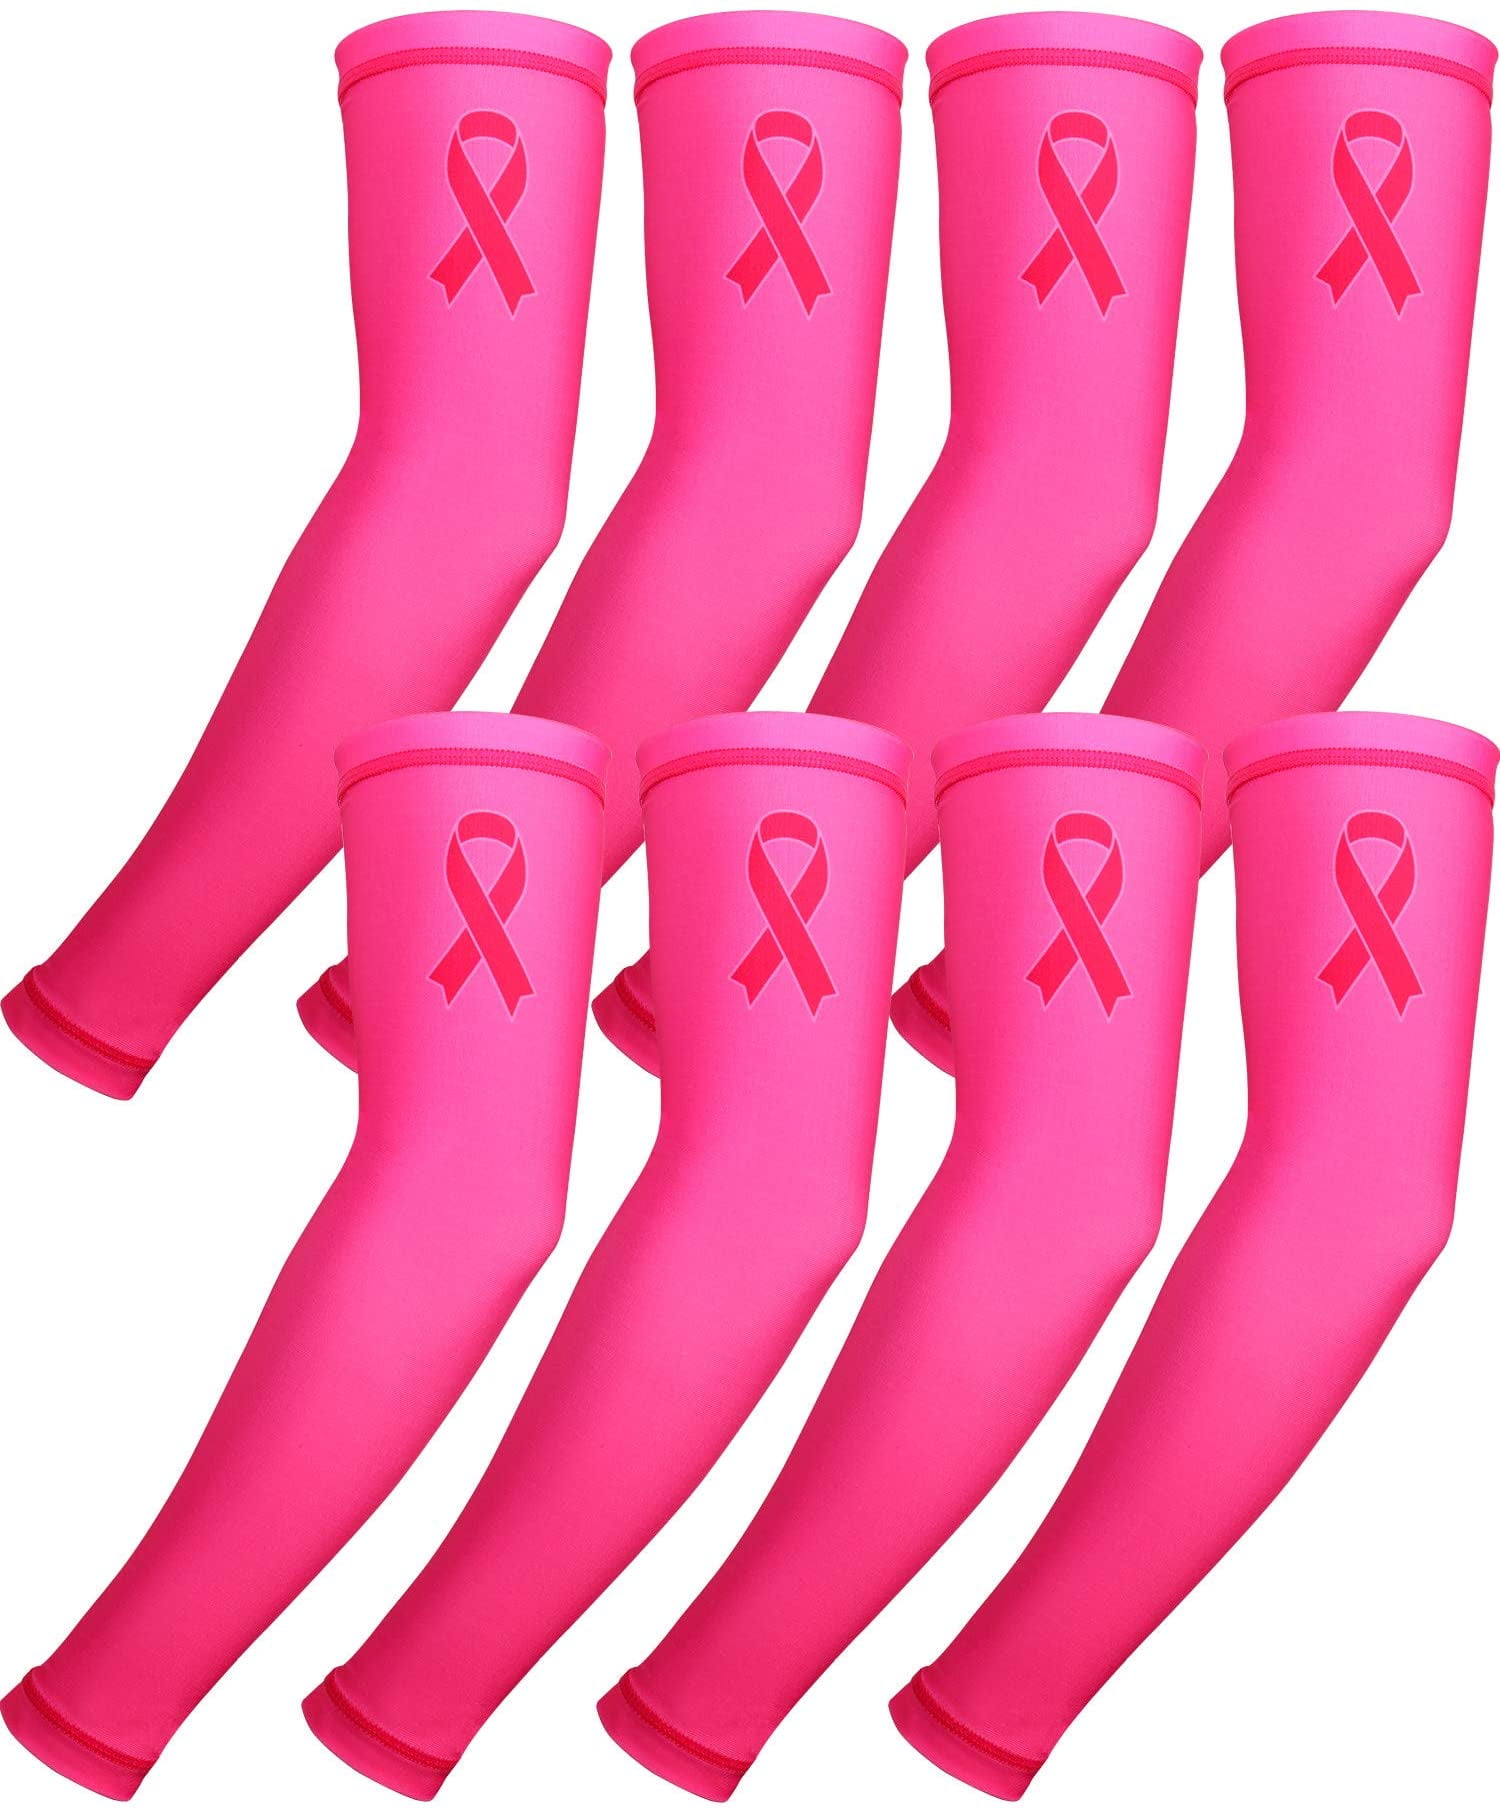 4 Pairs Breast Cancer Awareness Sleeves Pink Ribbon Arm Sleeves Pink Compression Arm Sleeve for Sports